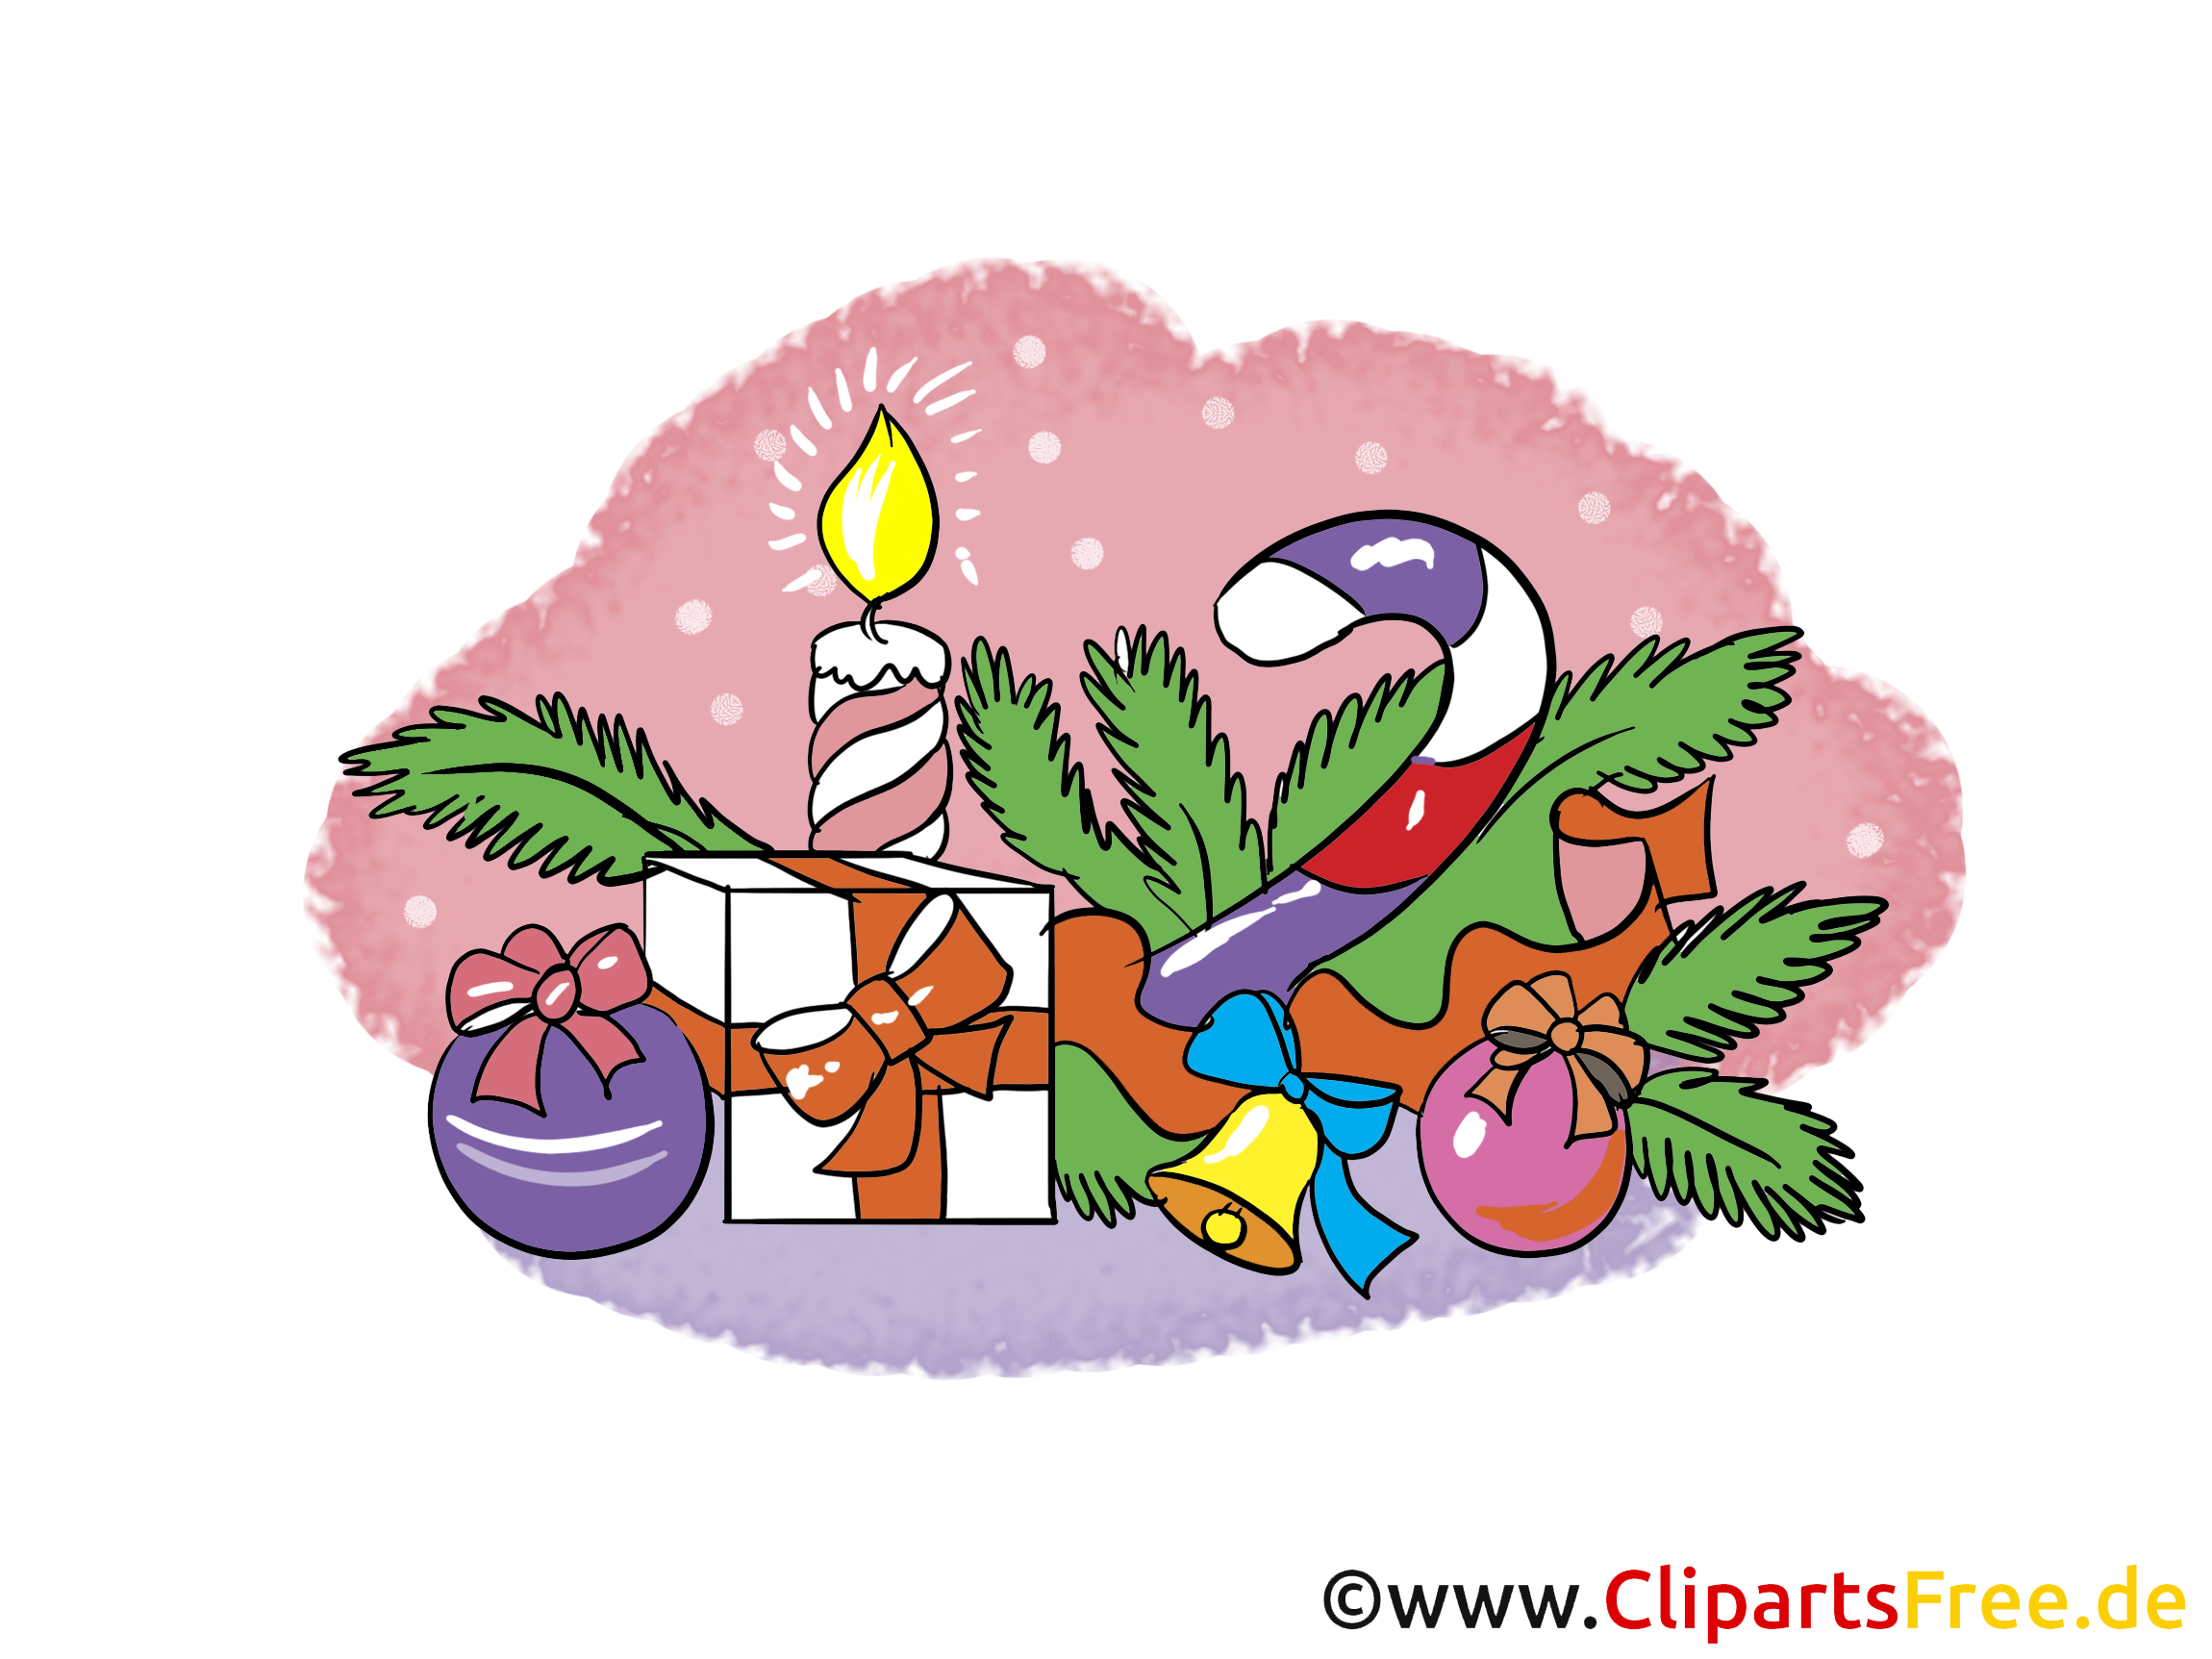 Free Clipart On New Year S Eve And Christmas